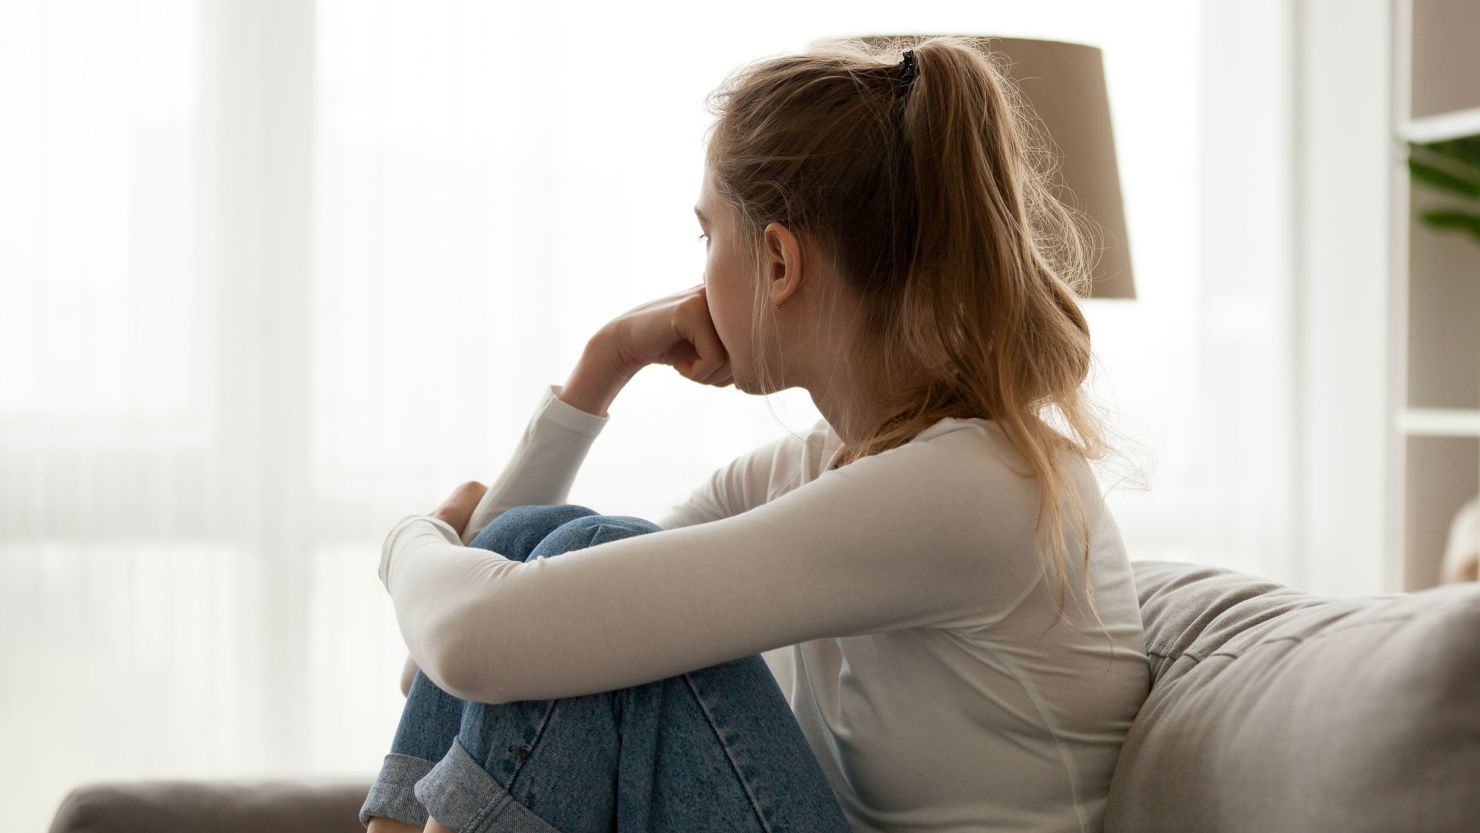 A new CDC report shows signs of improvement on youth mental health, but it remains a "substantial public health problem."